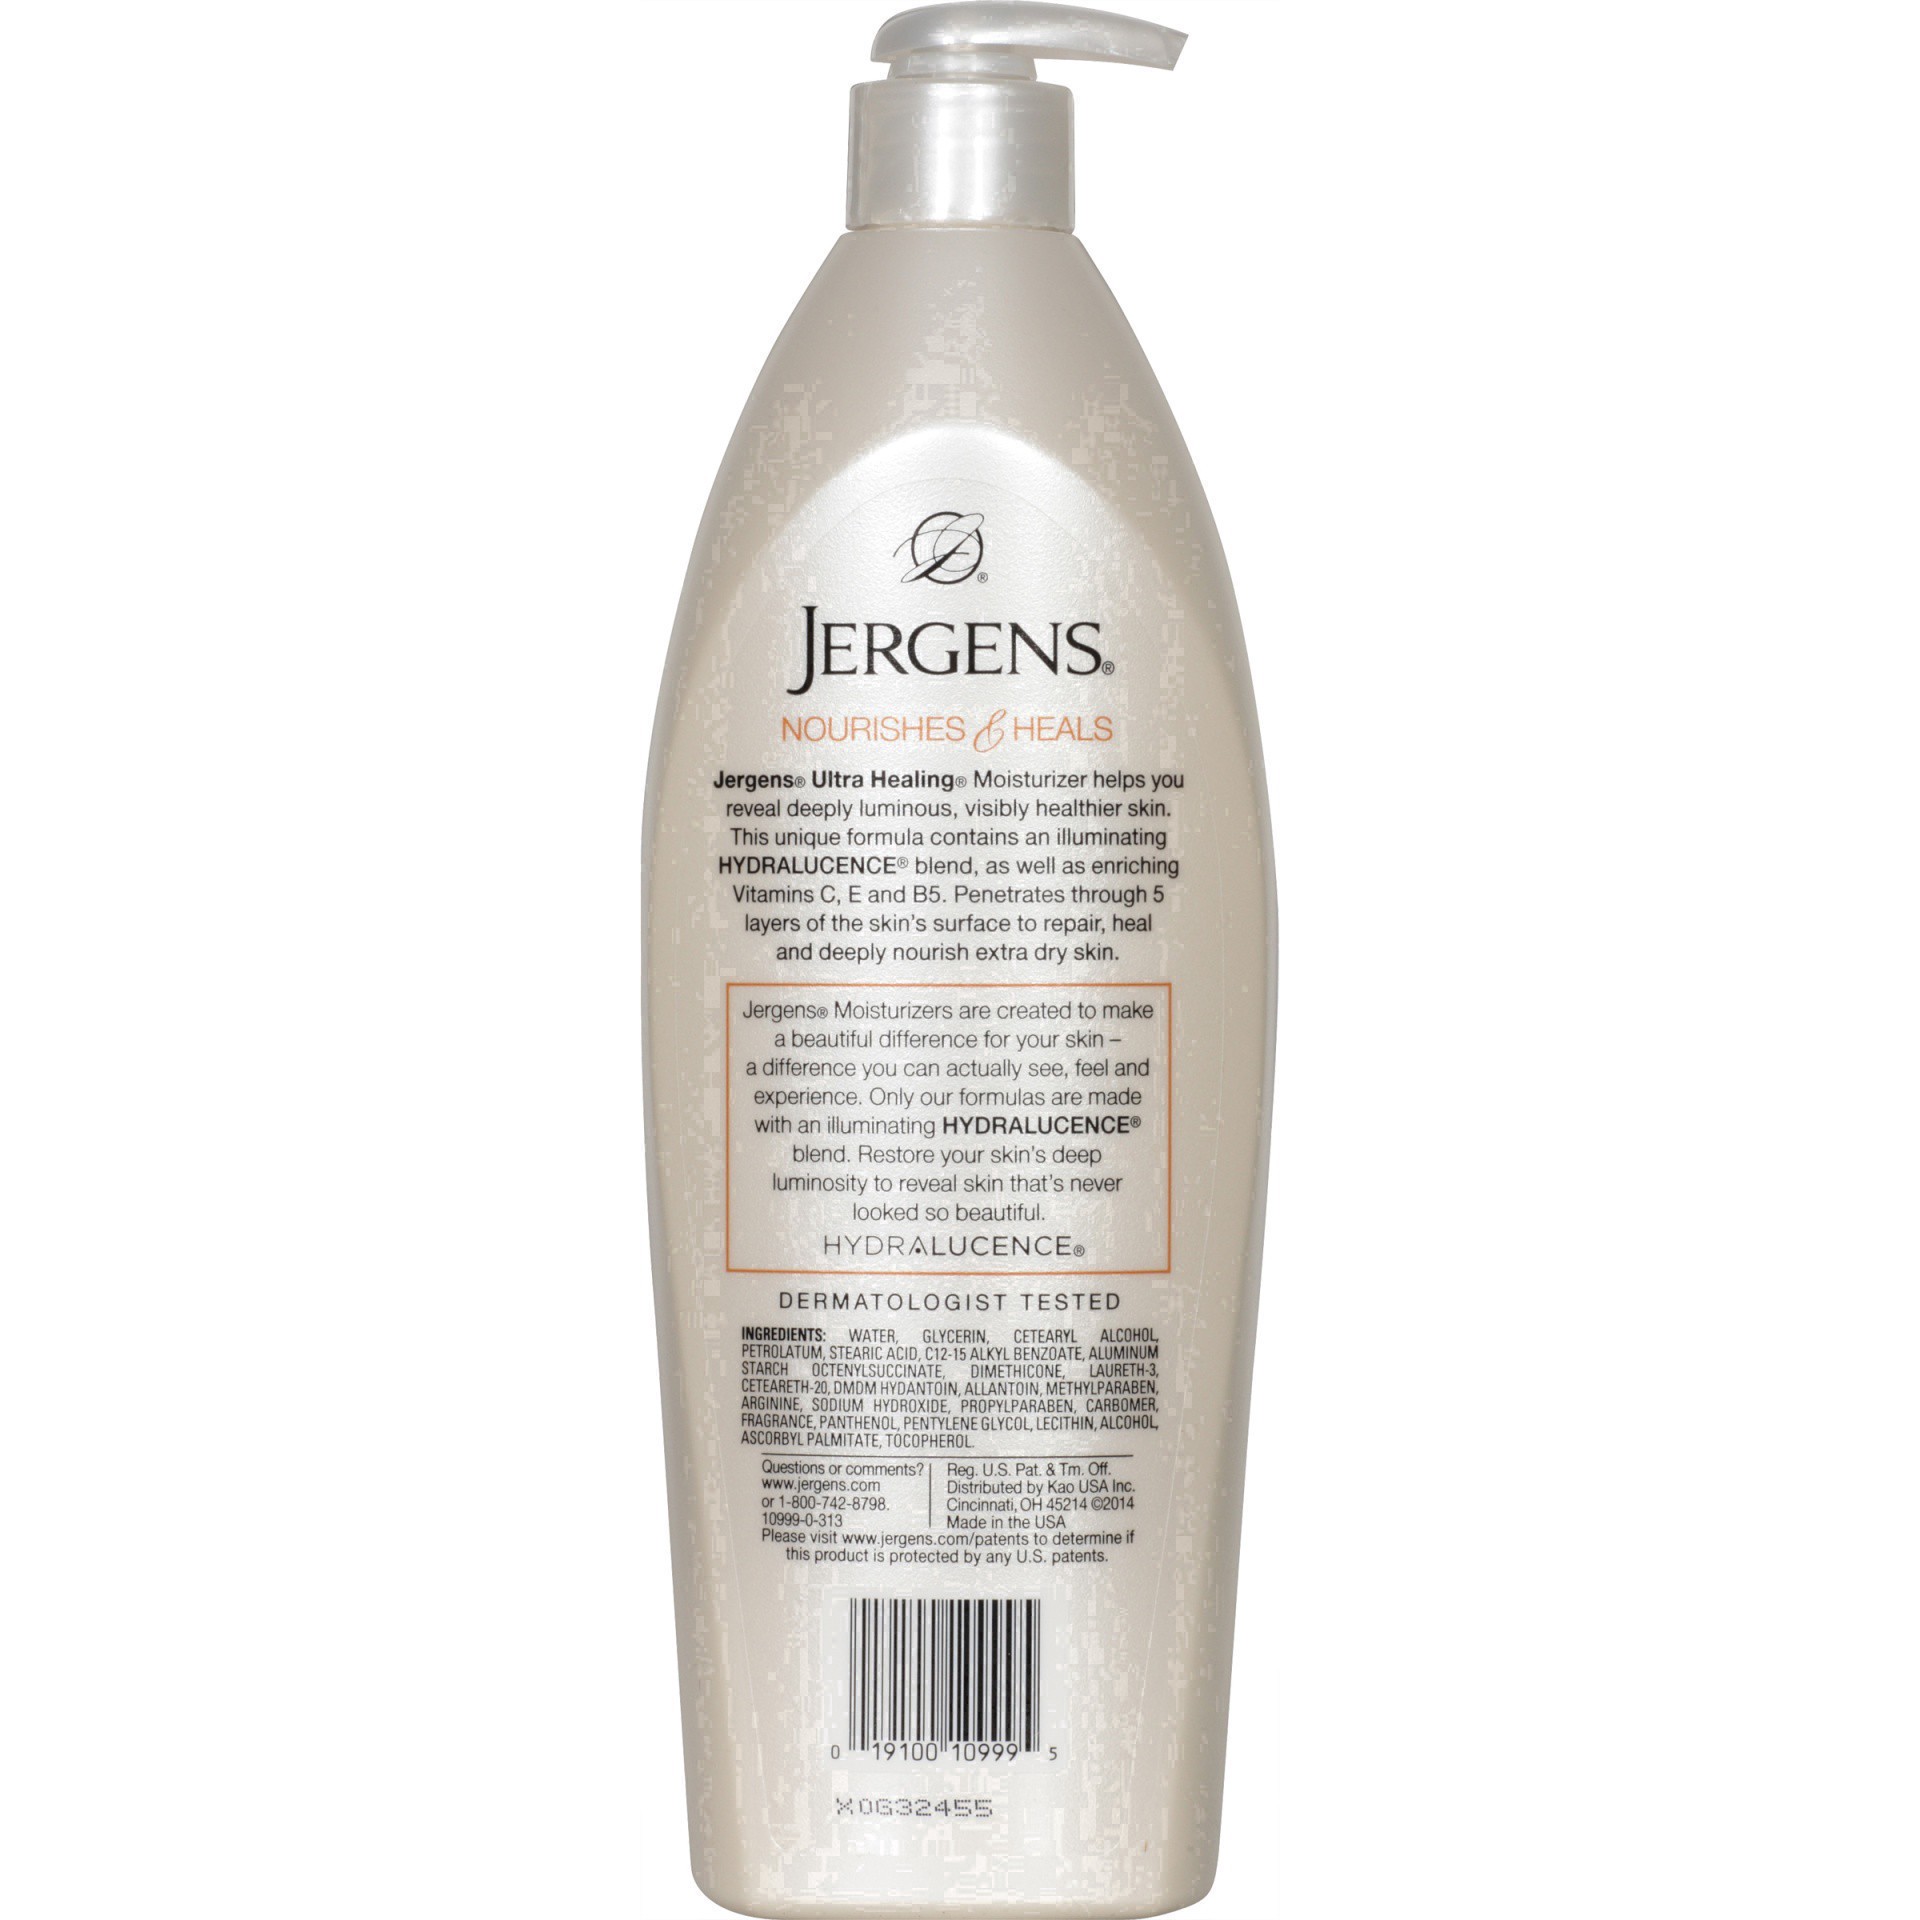 slide 4 of 67, Jergens Hand and Body Lotion, Dry Skin Moisturizer with Vitamins C,E, and B5, 21 fl oz